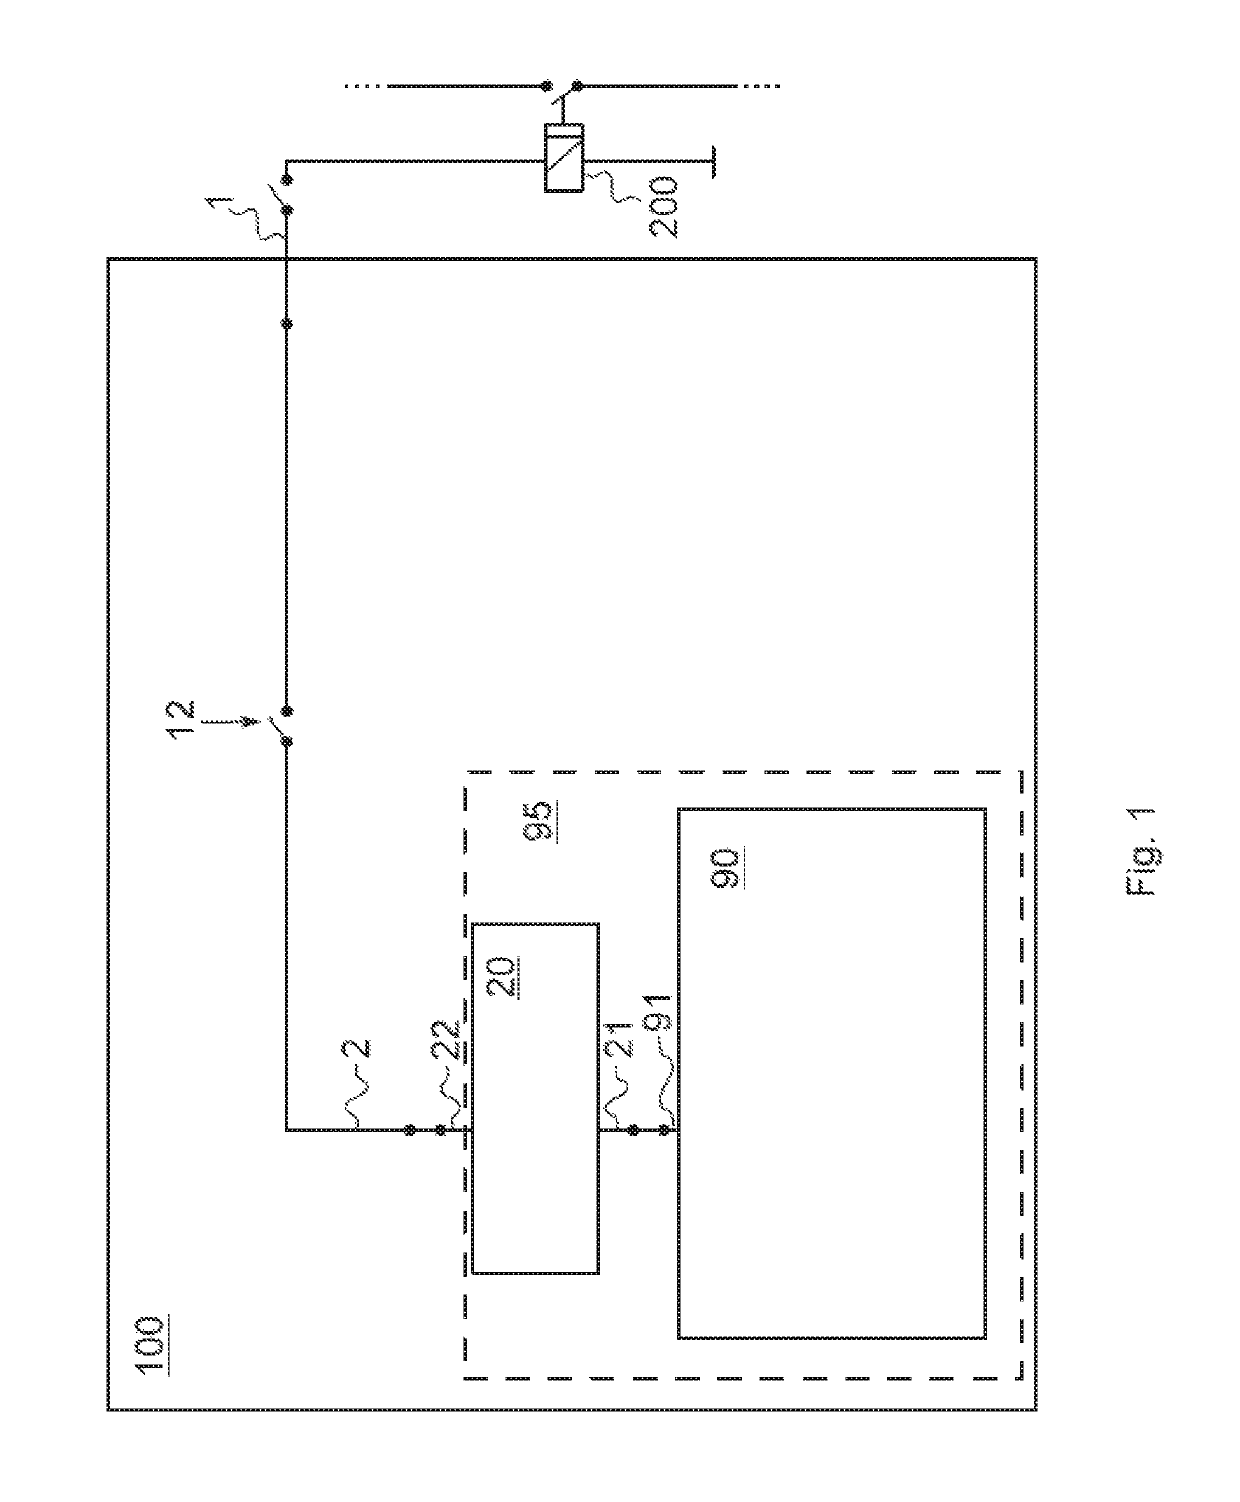 Driver circuit for the operation of a relay